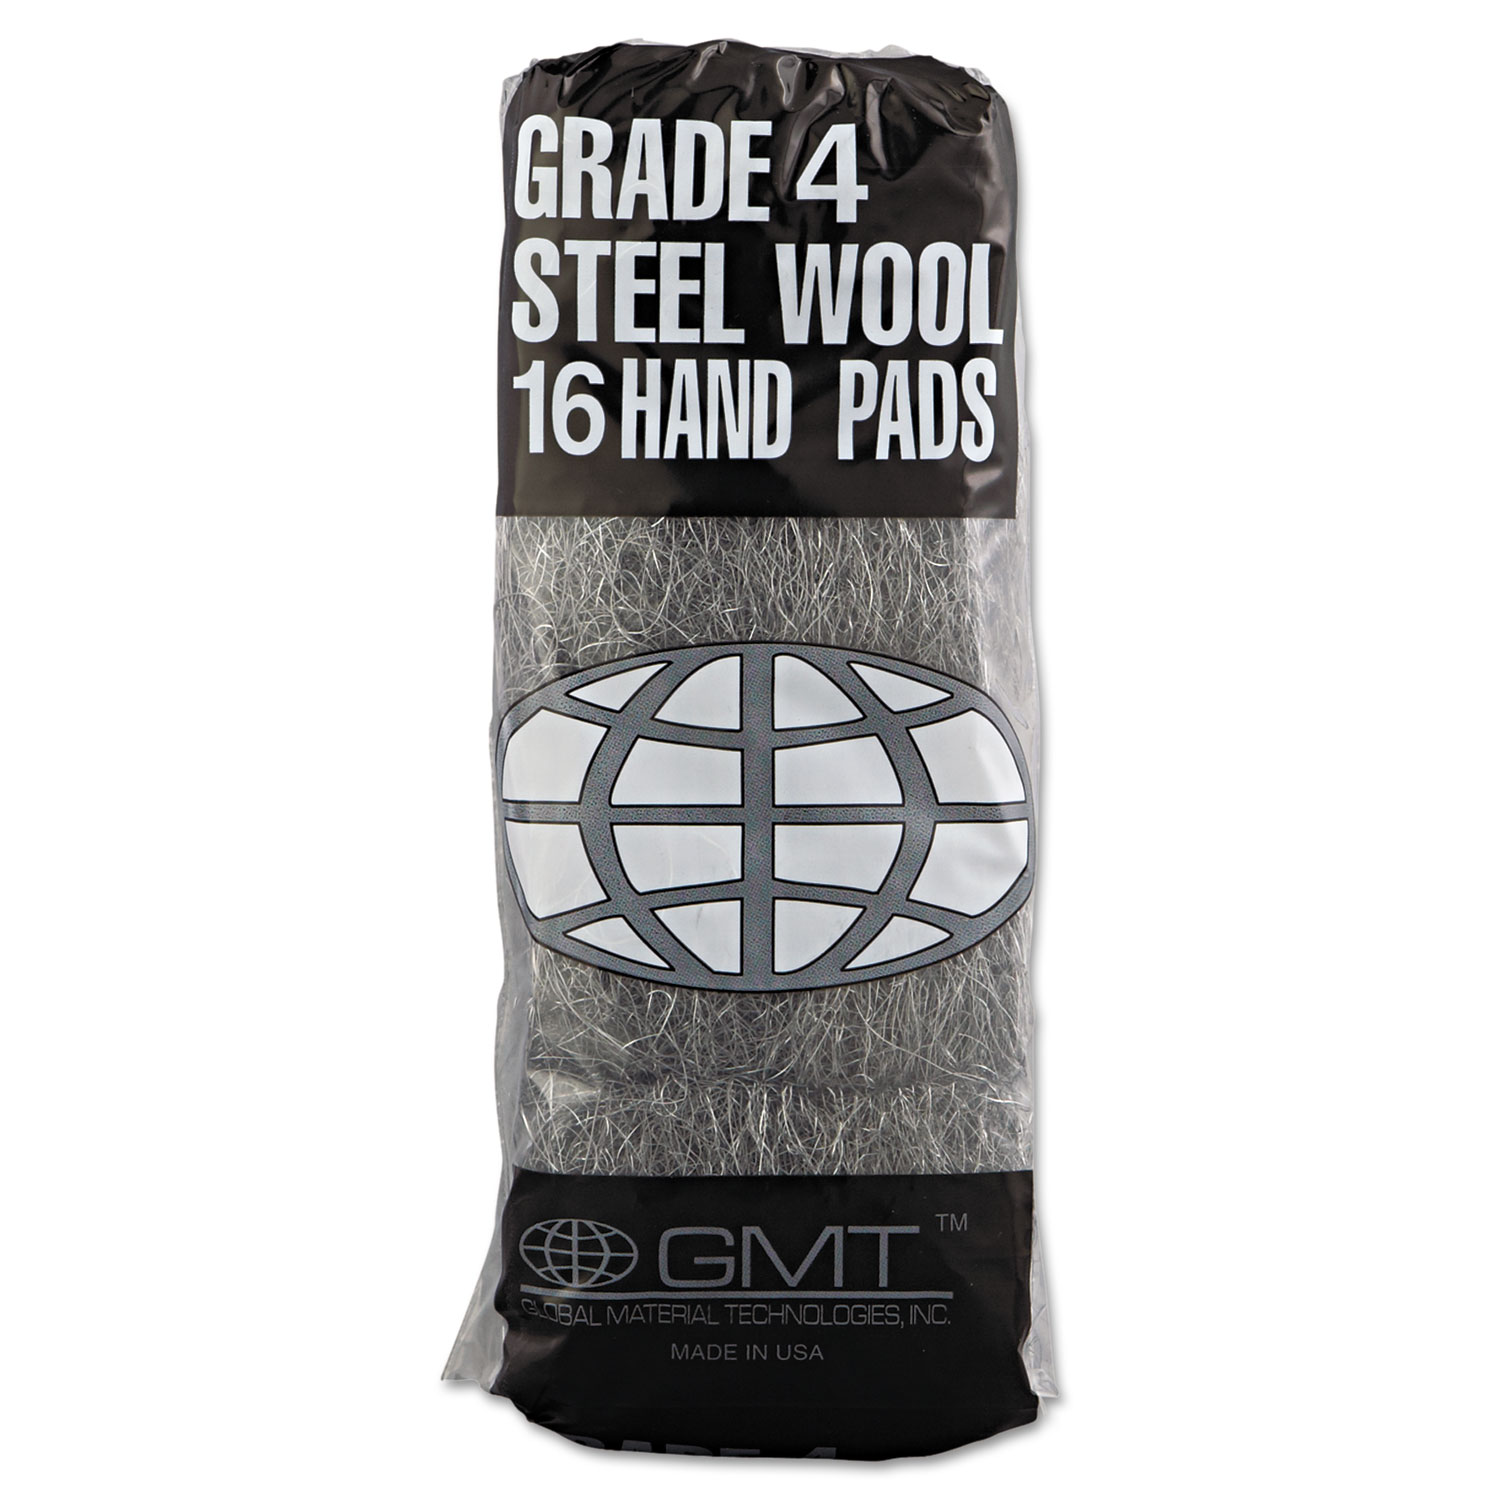 Sold as 1 PK Extra Course #4 Steel Wool 16 per Pack 